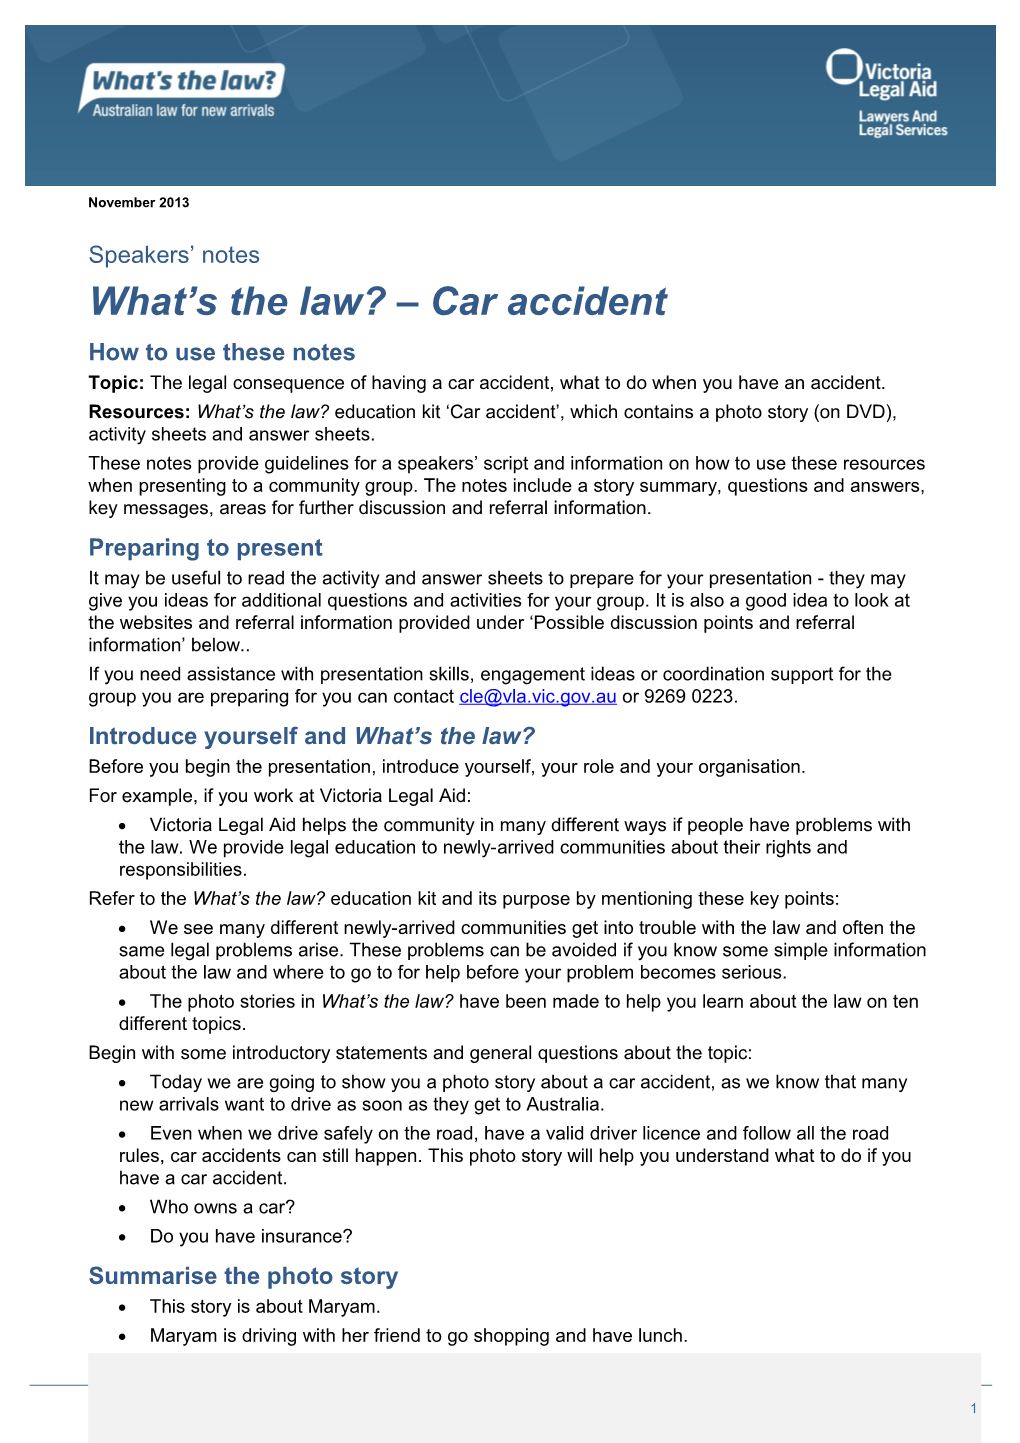 Speakers' Notes What's the Law Car Accident